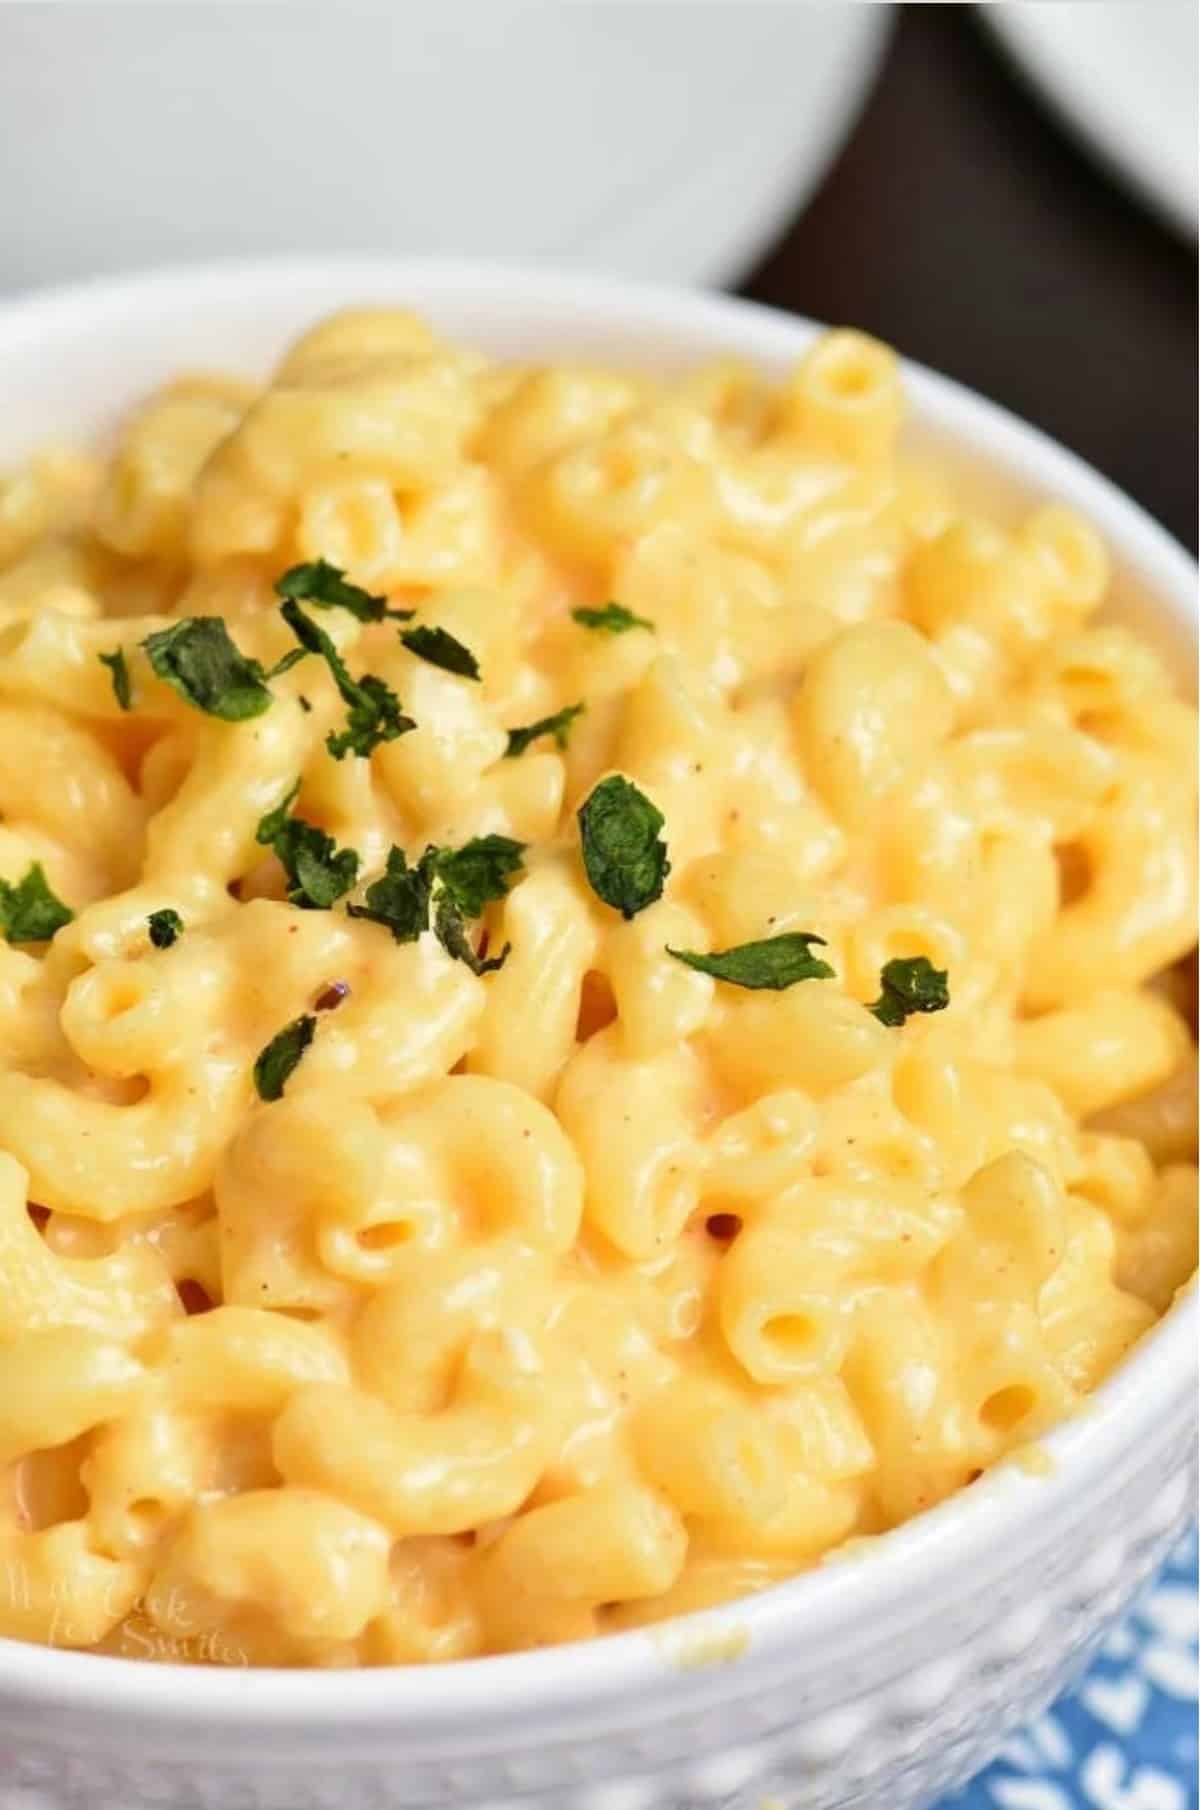 creamy cheesy macaroni in a white bowl topped with green parsley.